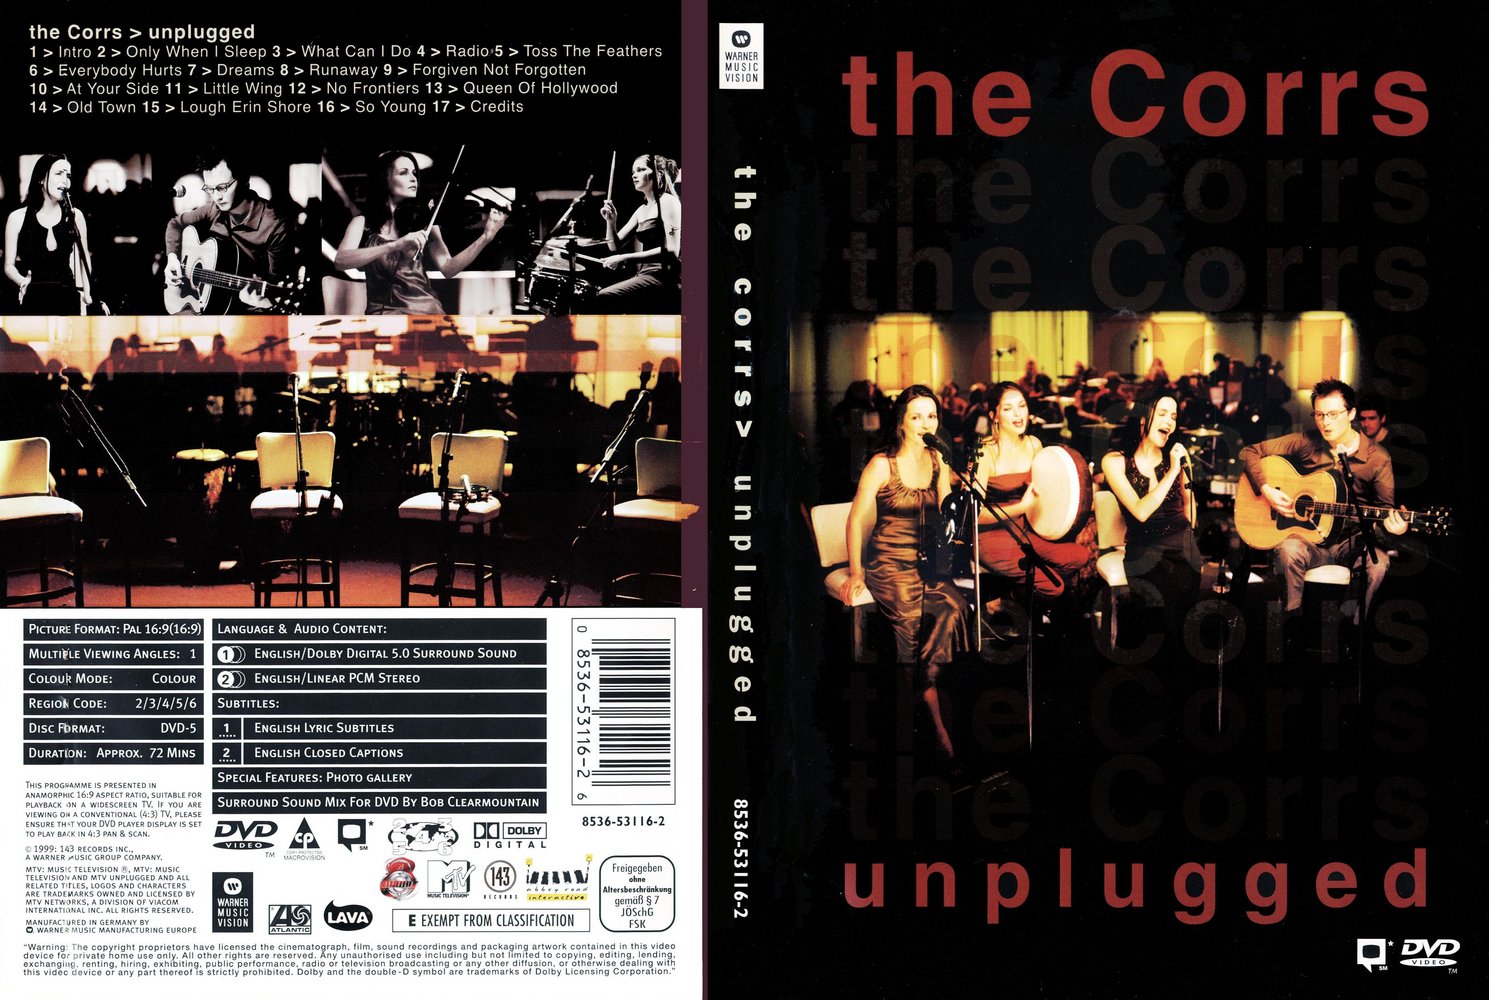 Jaquette DVD The Corrs Unplugged